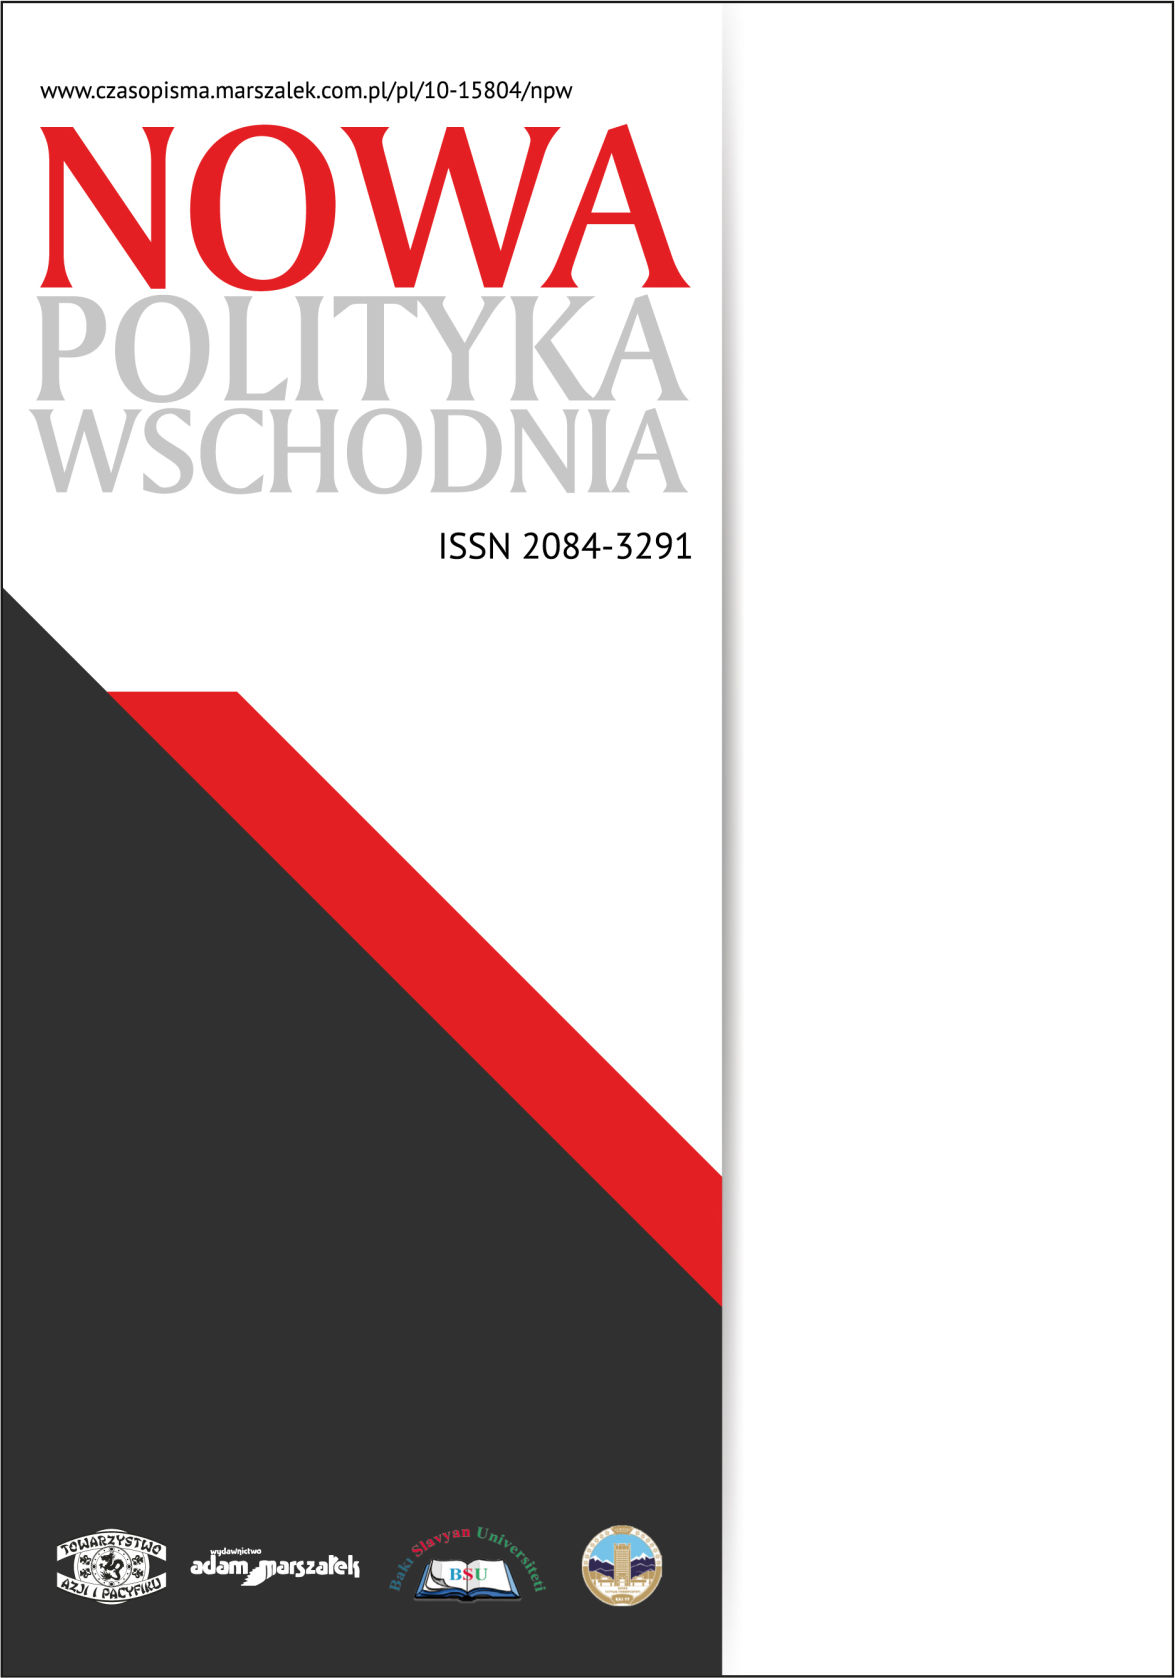 Characteristics of calculating the power of states in Eastern Europe: a powermetric approach